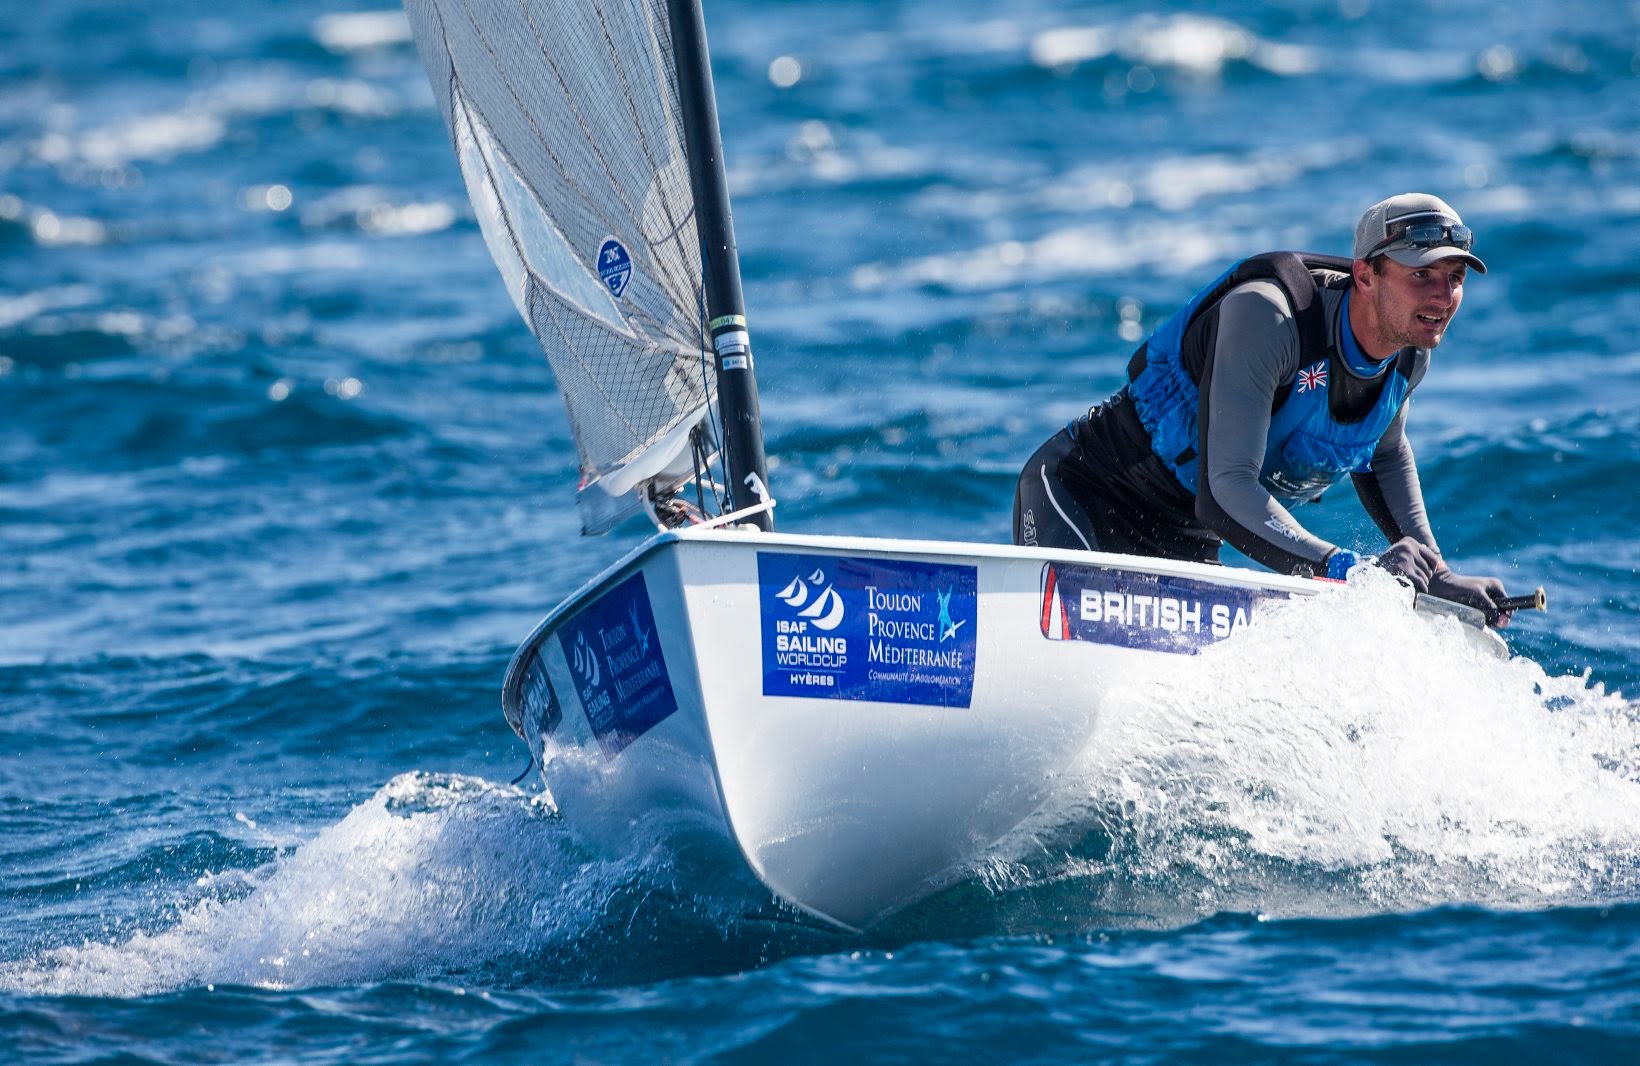 ISAF Sailing World Cup Hyeres – Giles Scott and Luke Patience on day two